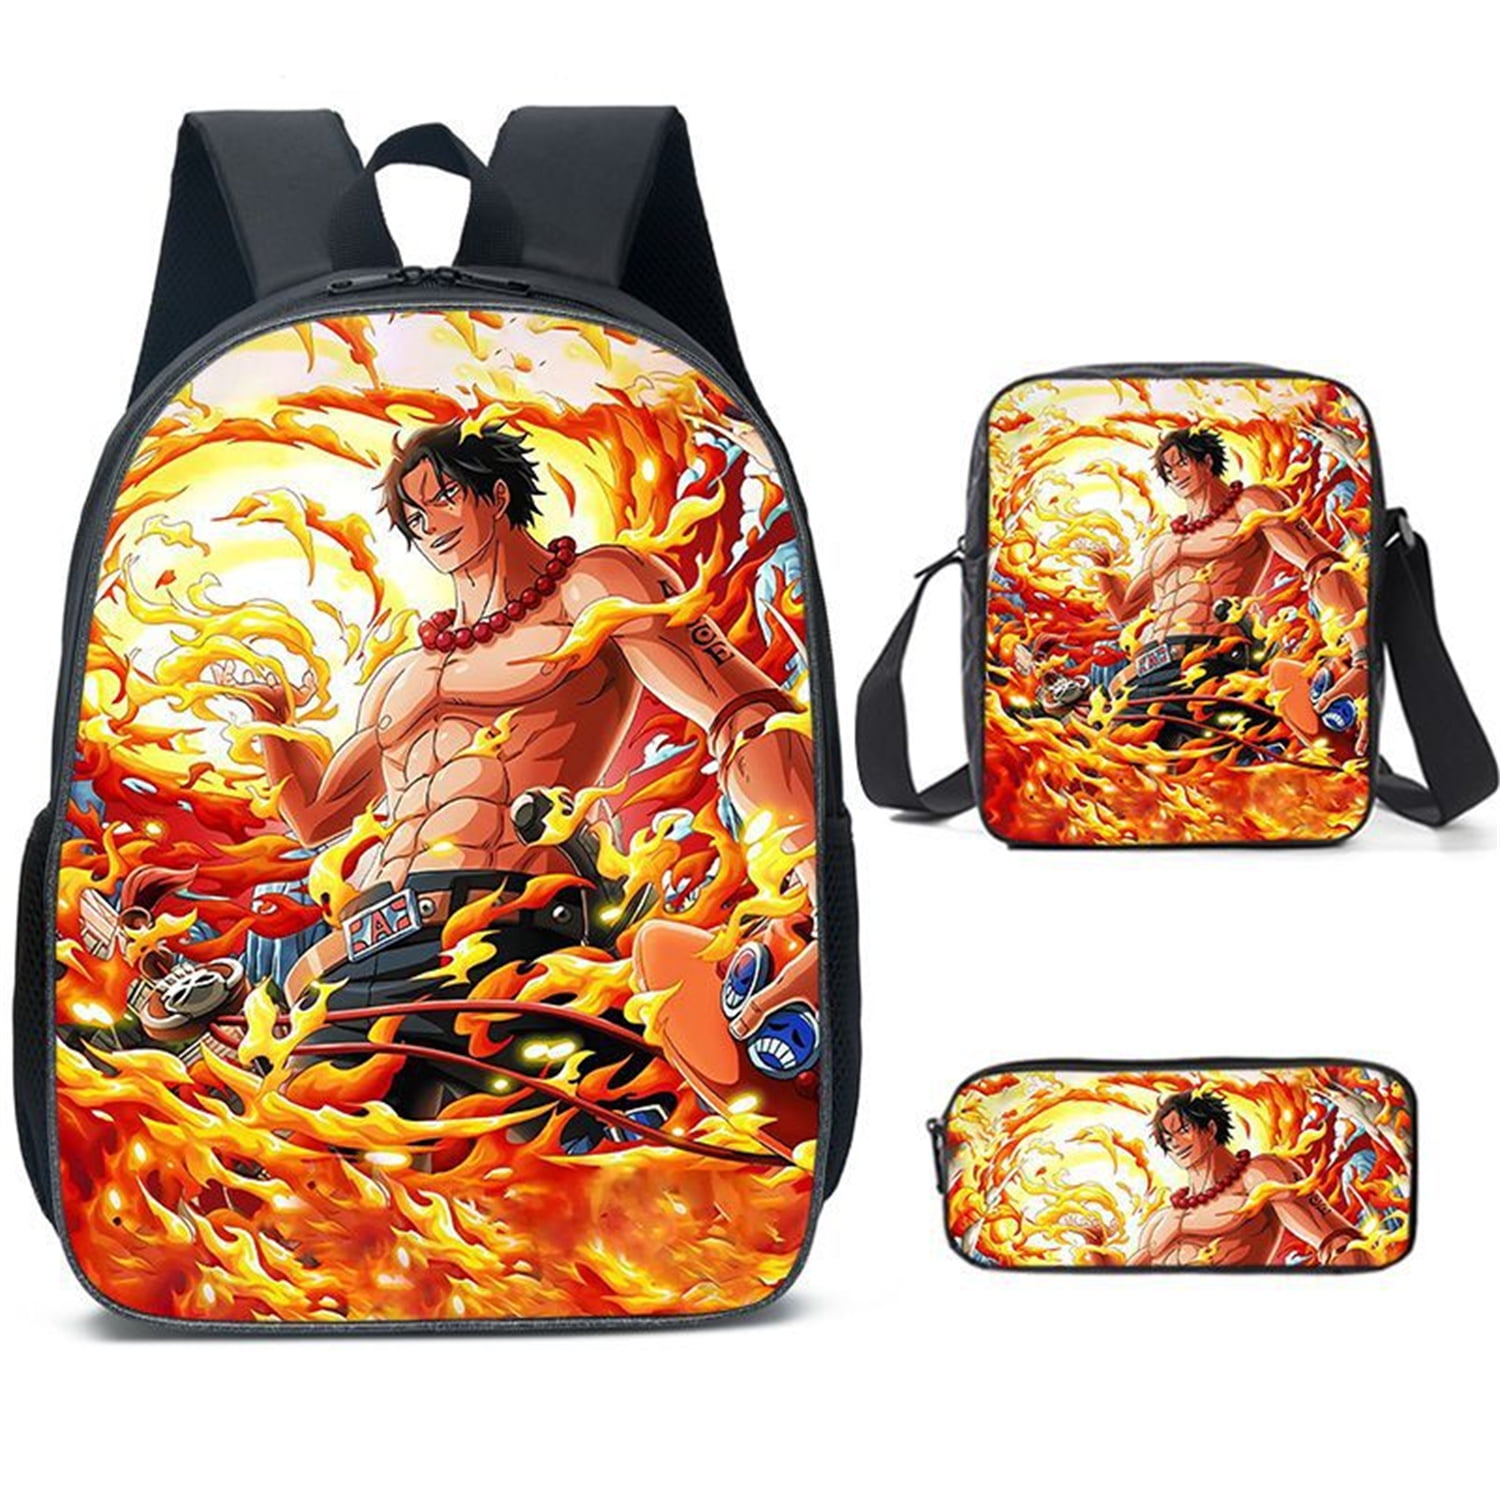 Giant Student Backpack Pursued By Japanese Anime Charming Anime |  lupon.gov.ph